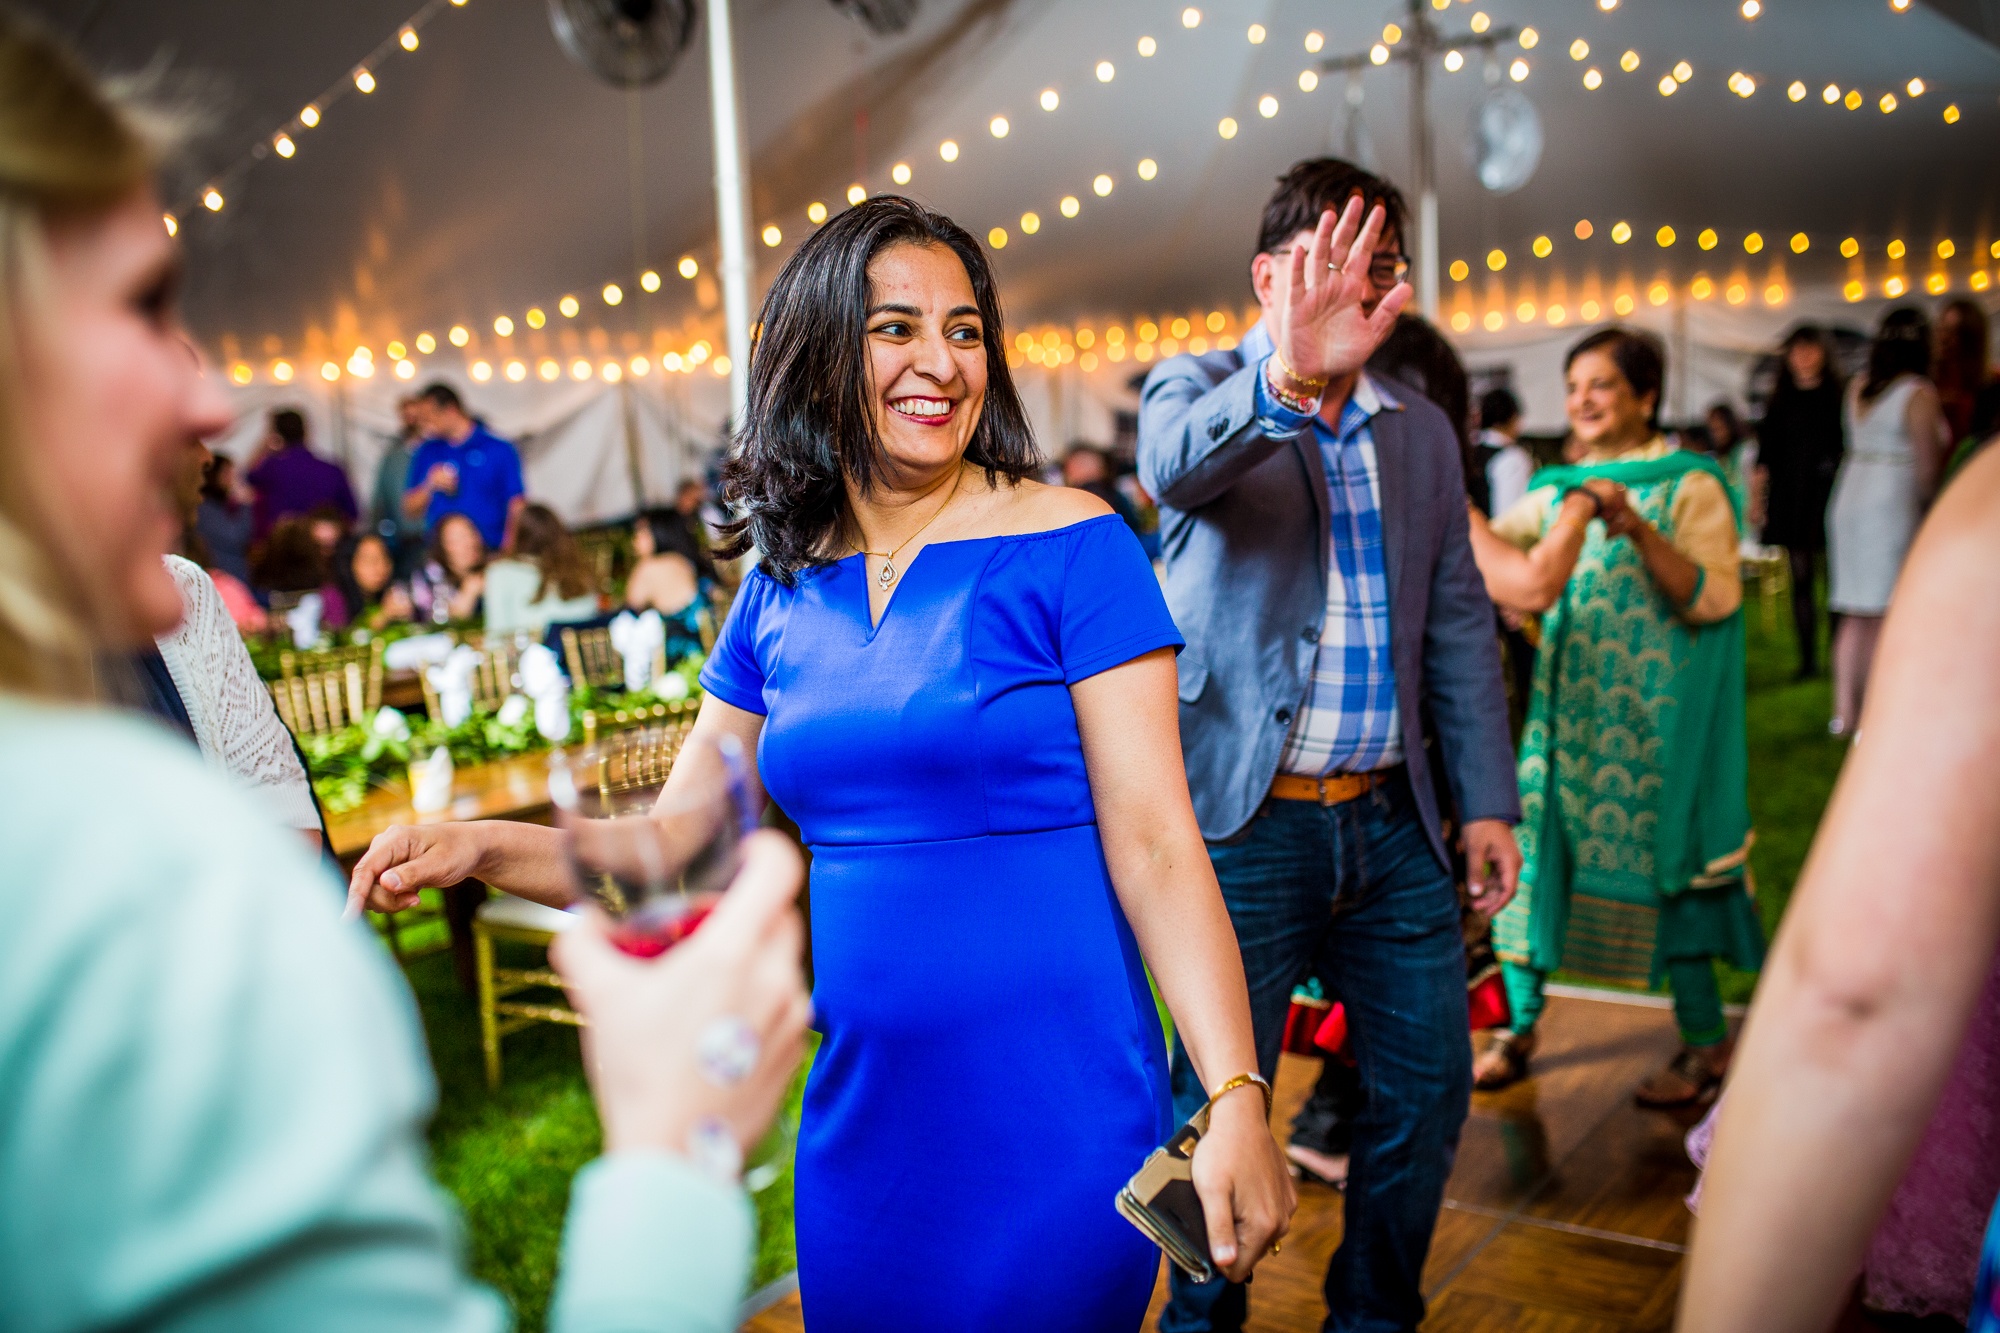 Guests dance together at a backyard wedding in Yorkville, Illinois